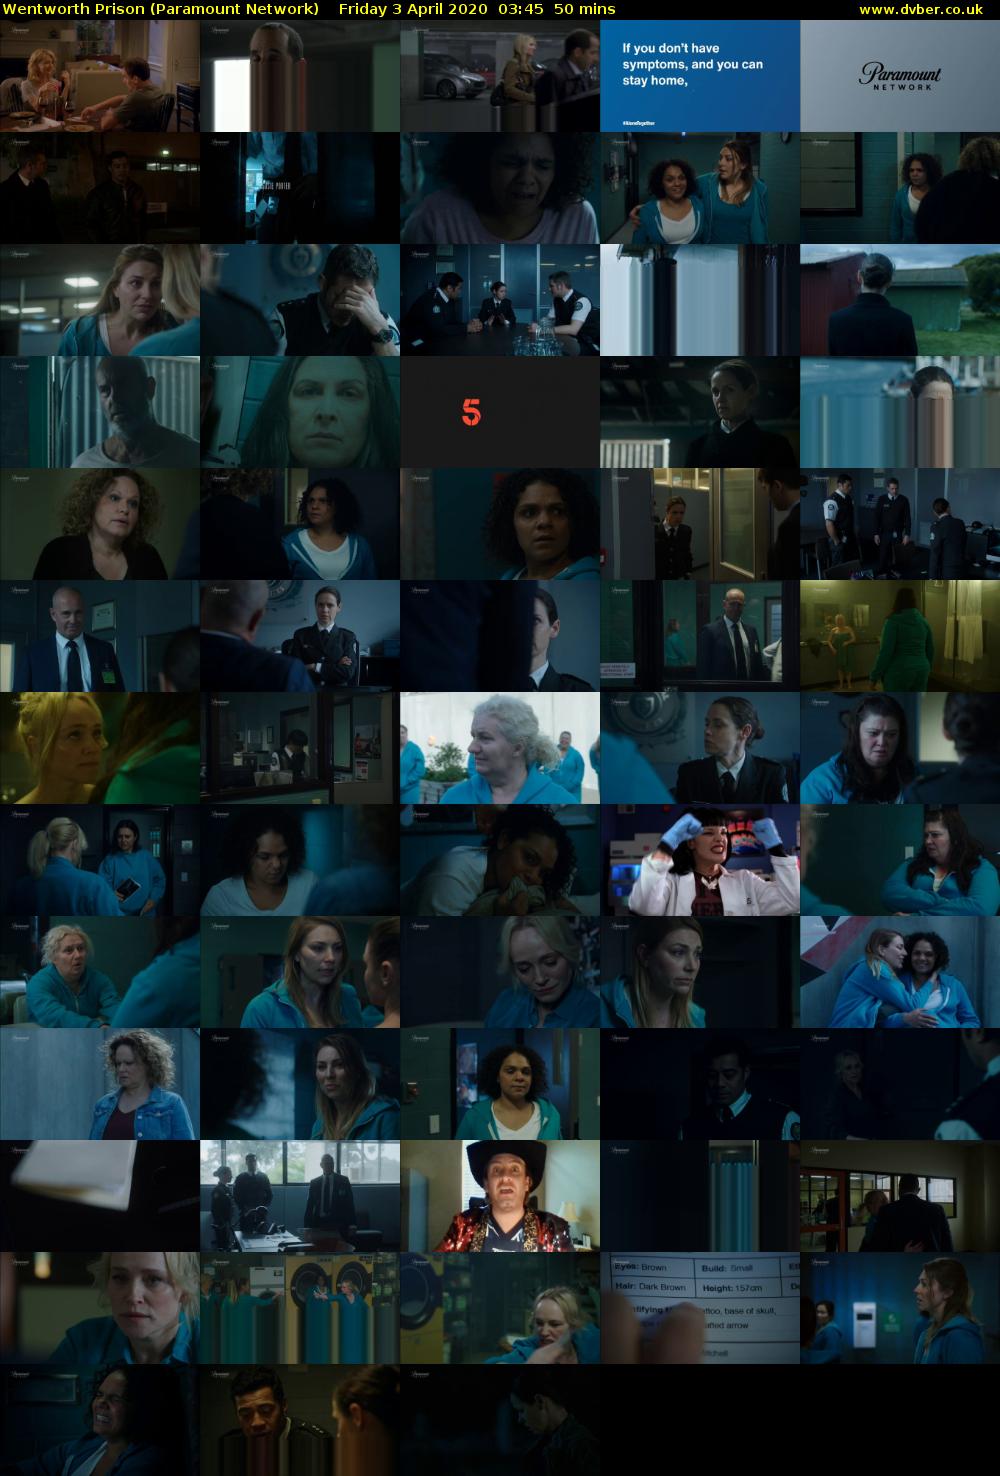 Wentworth Prison (Paramount Network) Friday 3 April 2020 03:45 - 04:35